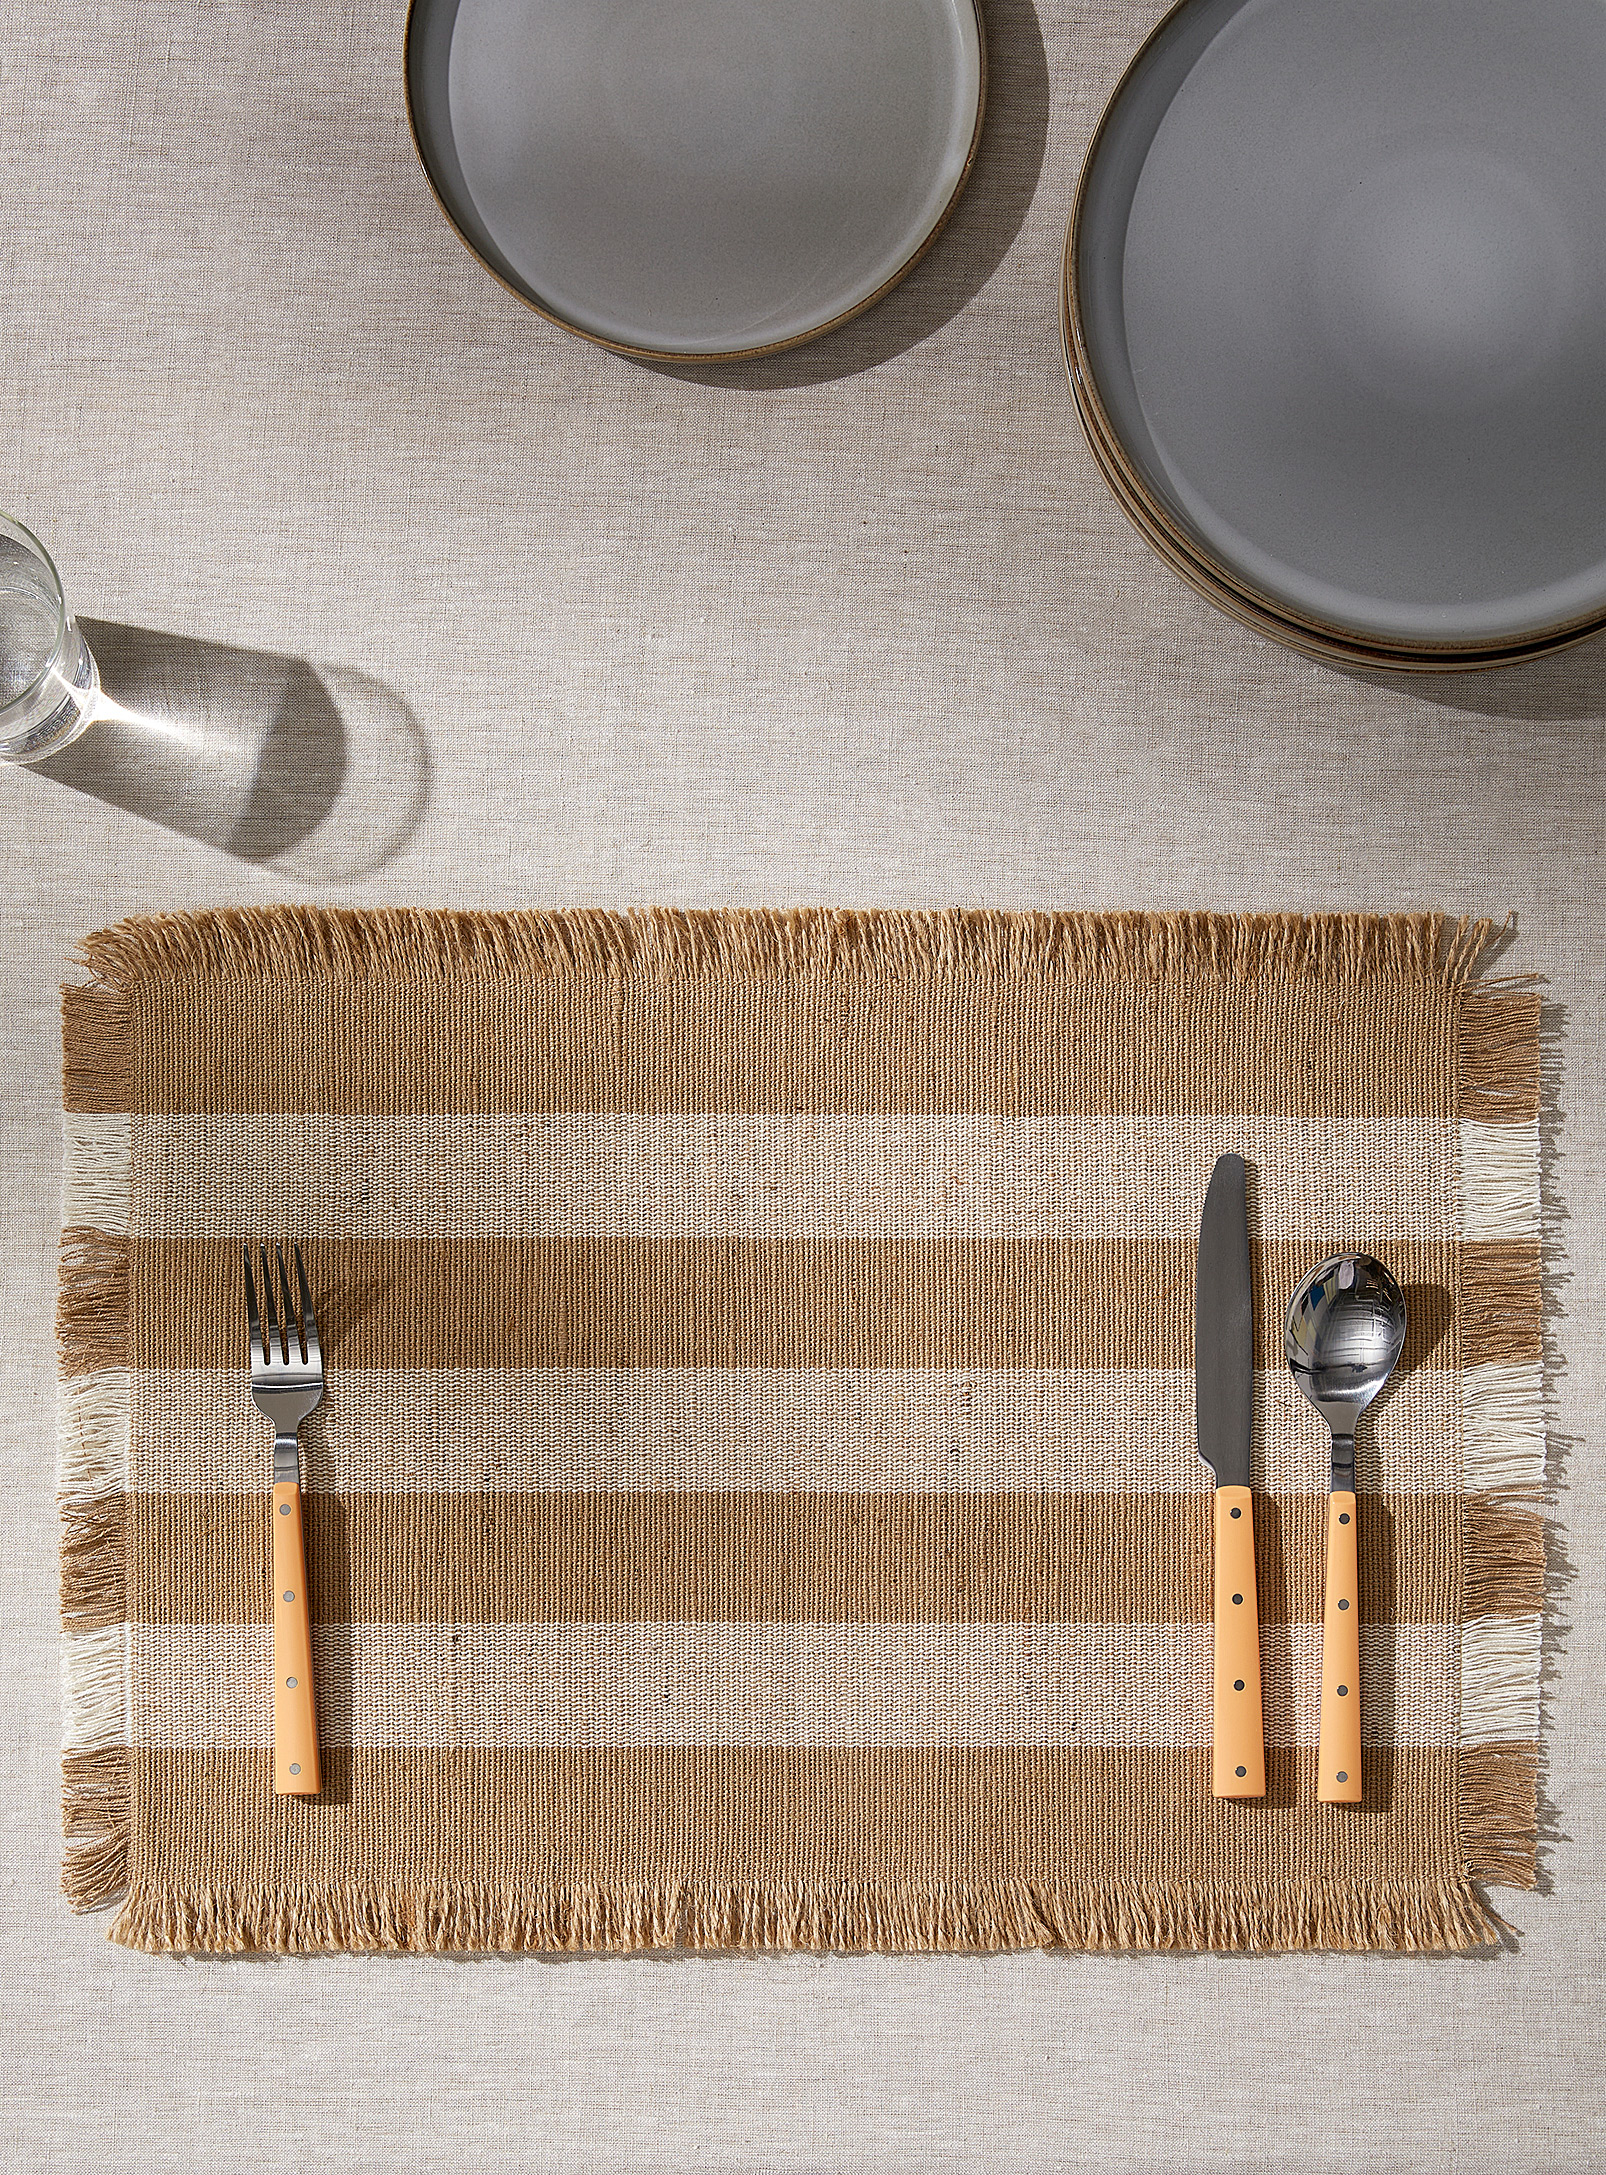 Simons Maison Maritime Stripes Jute And Cotton Placemat In White